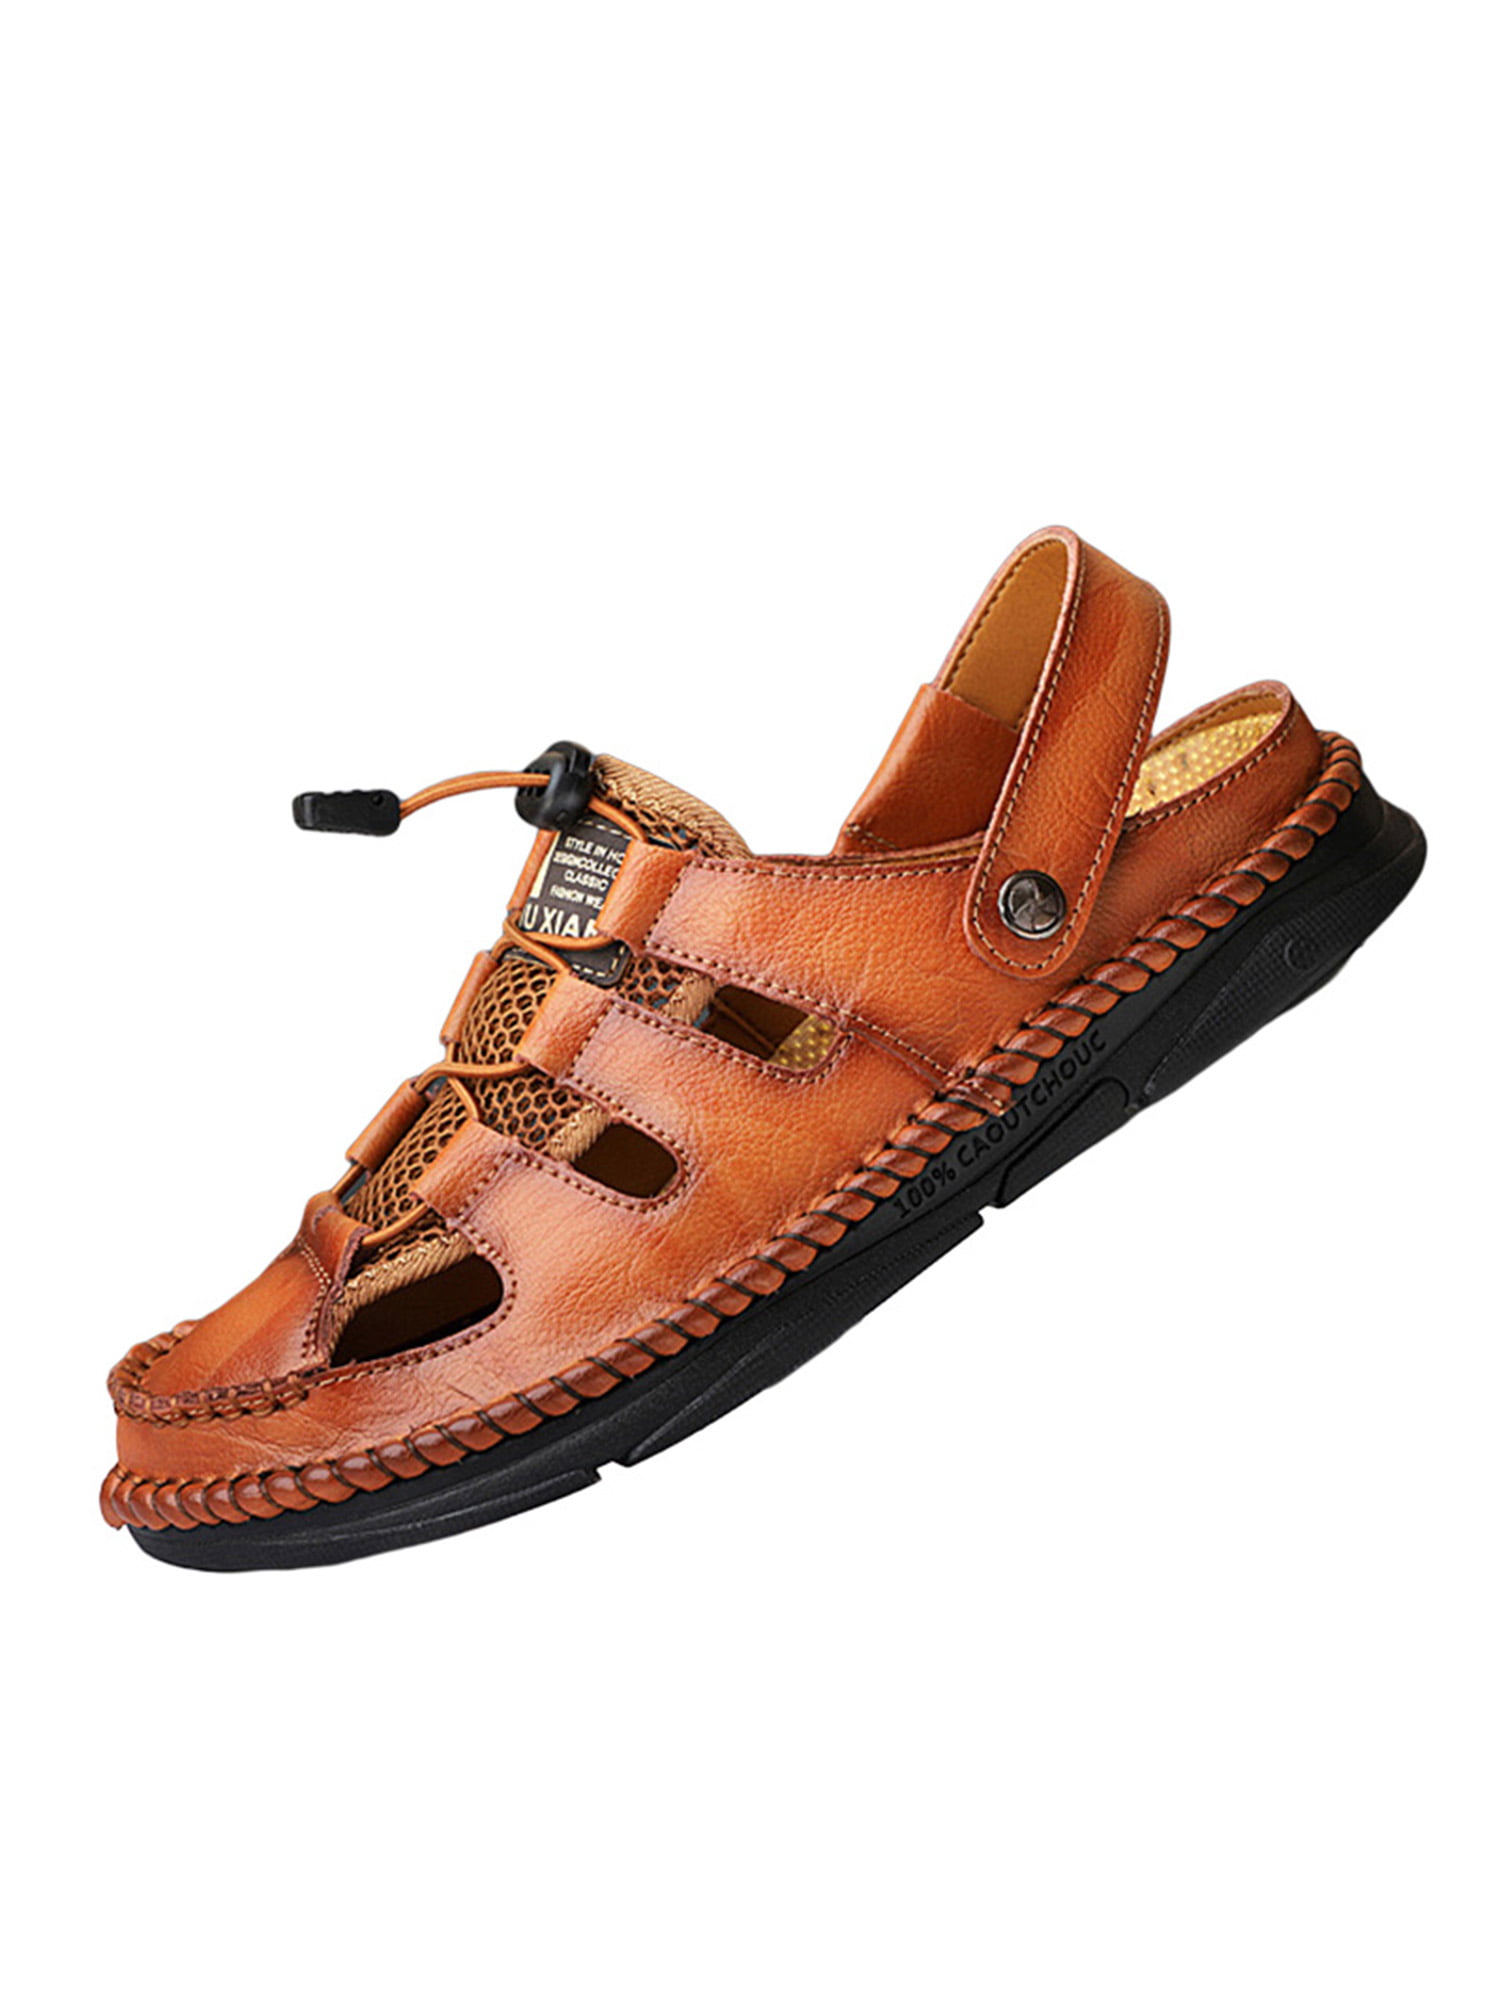 US Size 6-13 Men's Brown Leather Safety Closed Toe Outdoors Sandals Casual Shoes 